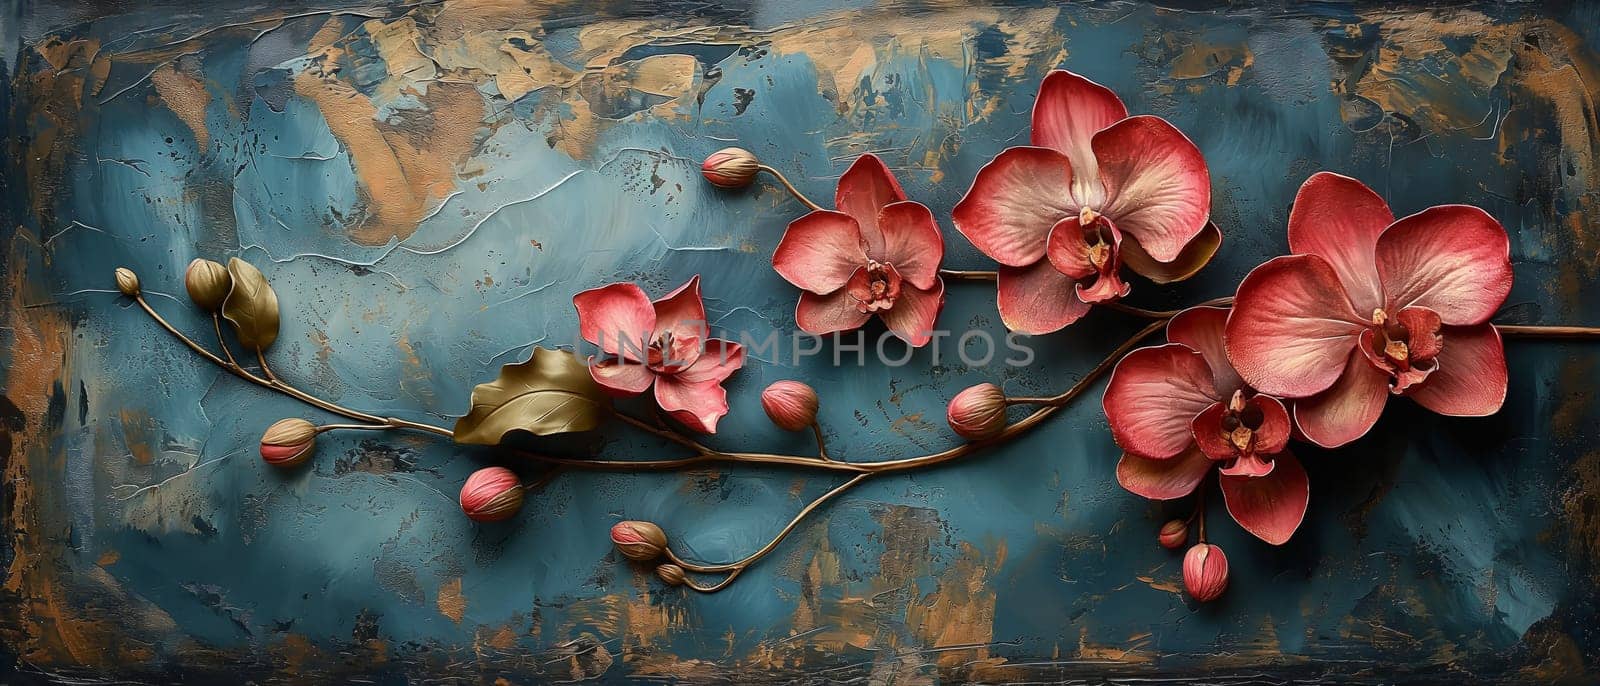 Orchids Painting on Blue Background. by Fischeron